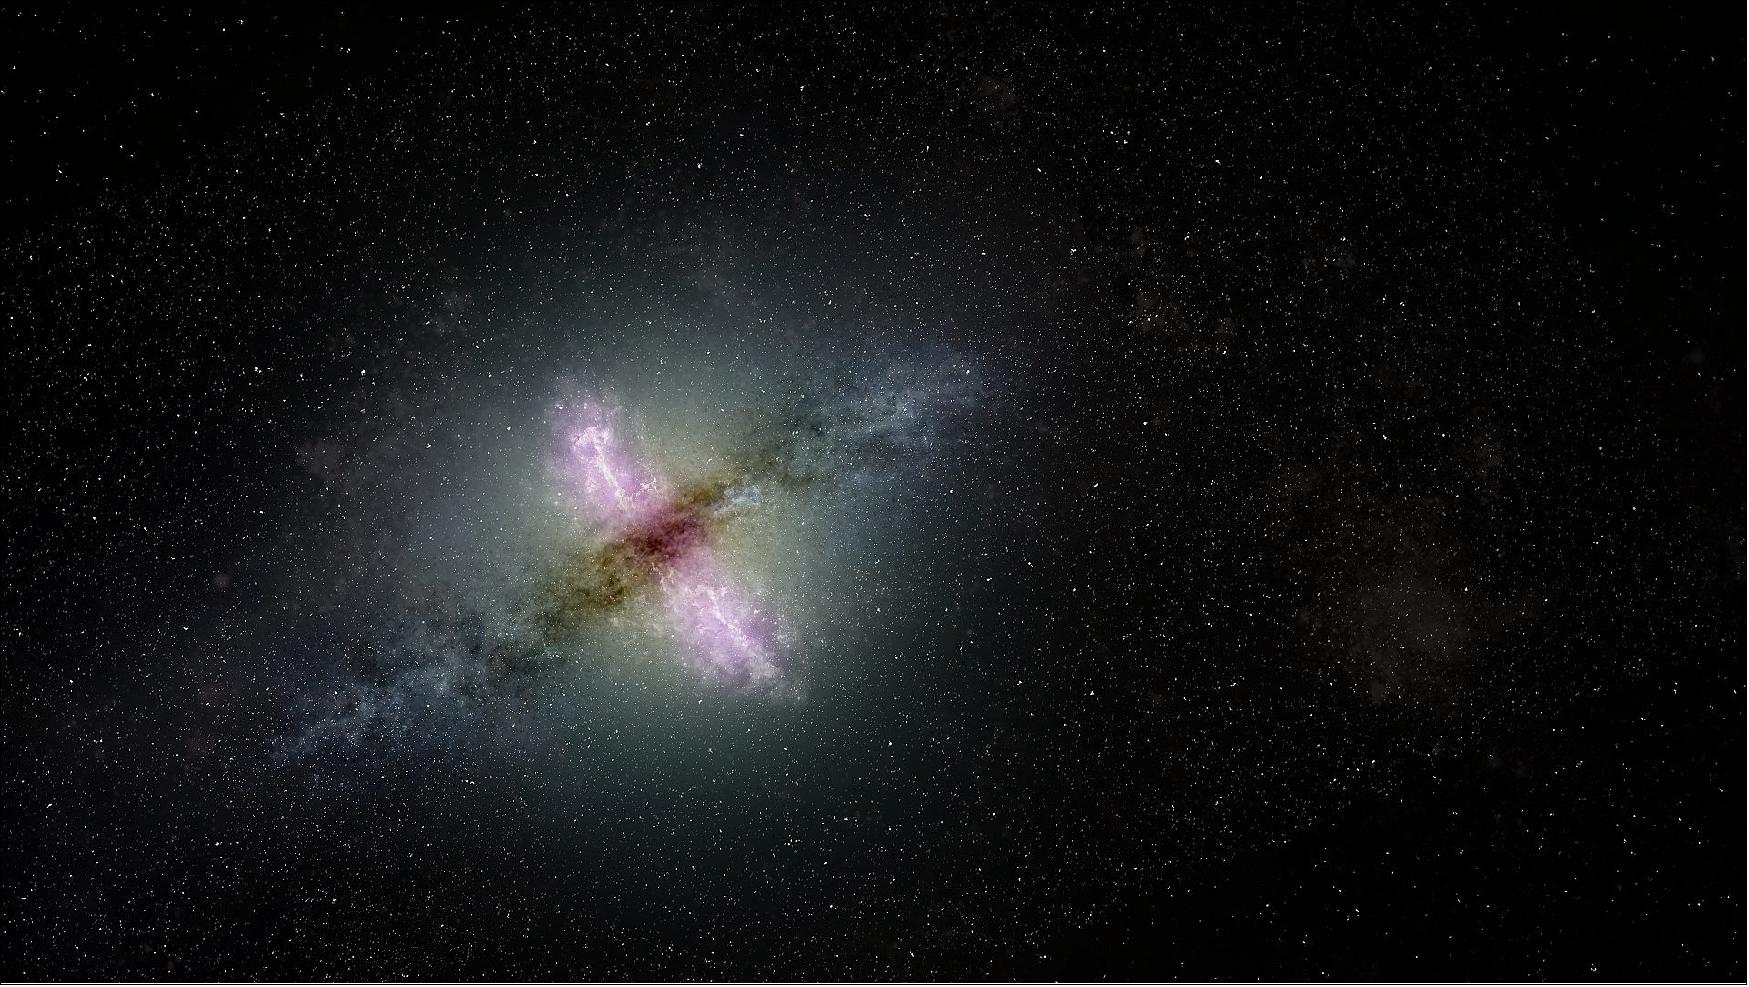 Figure 39: Artist's conception of a galaxy with an active nucleus propelling jets of material outward from the galaxy's center (image credit: Sophia Dagnello, NRAO/AUI/NSF)